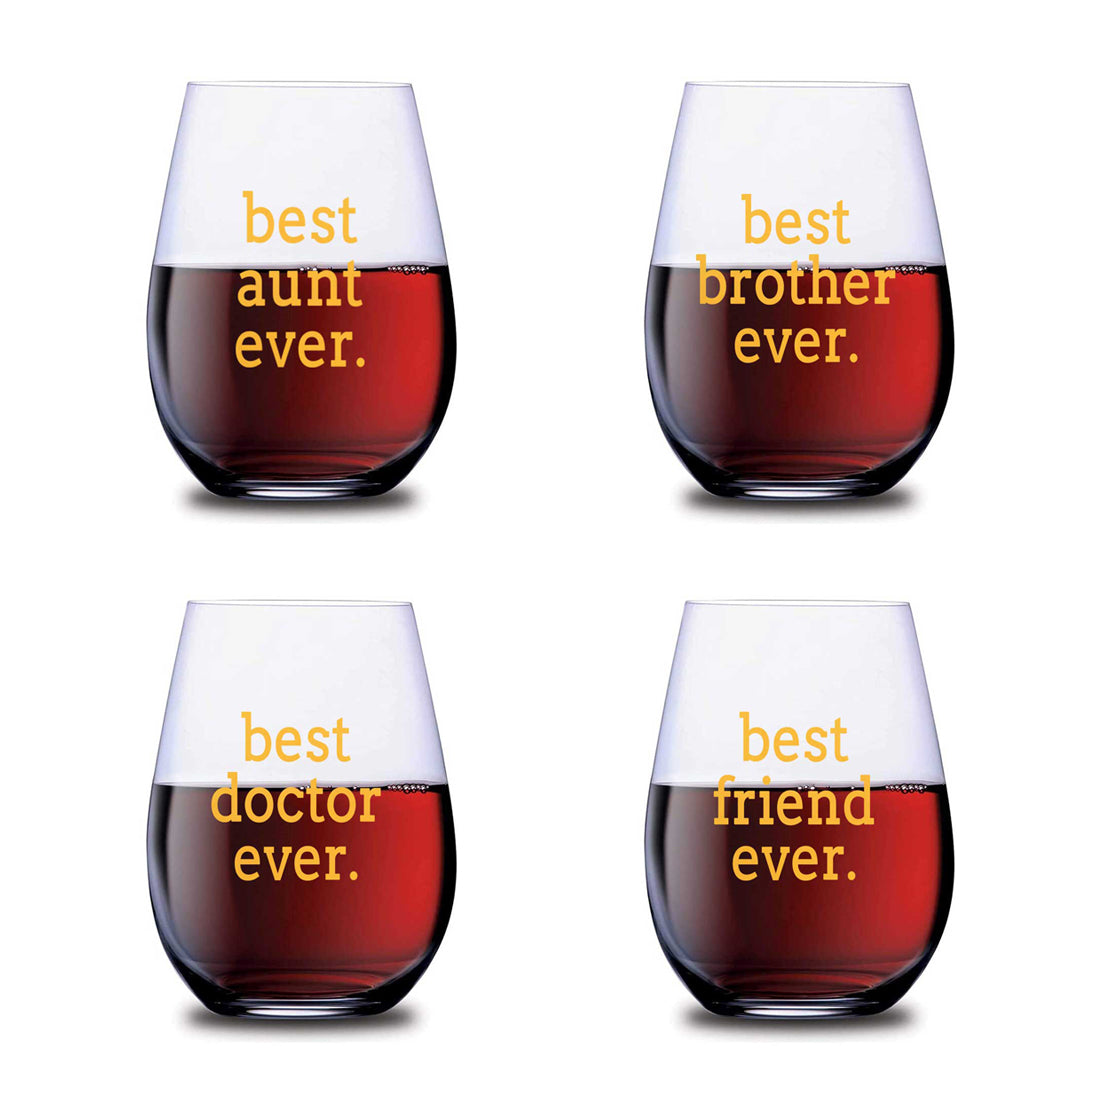 Personalized Stemless Wine Glass For Wines Whiskey Multipurpose Use - Add Your Text